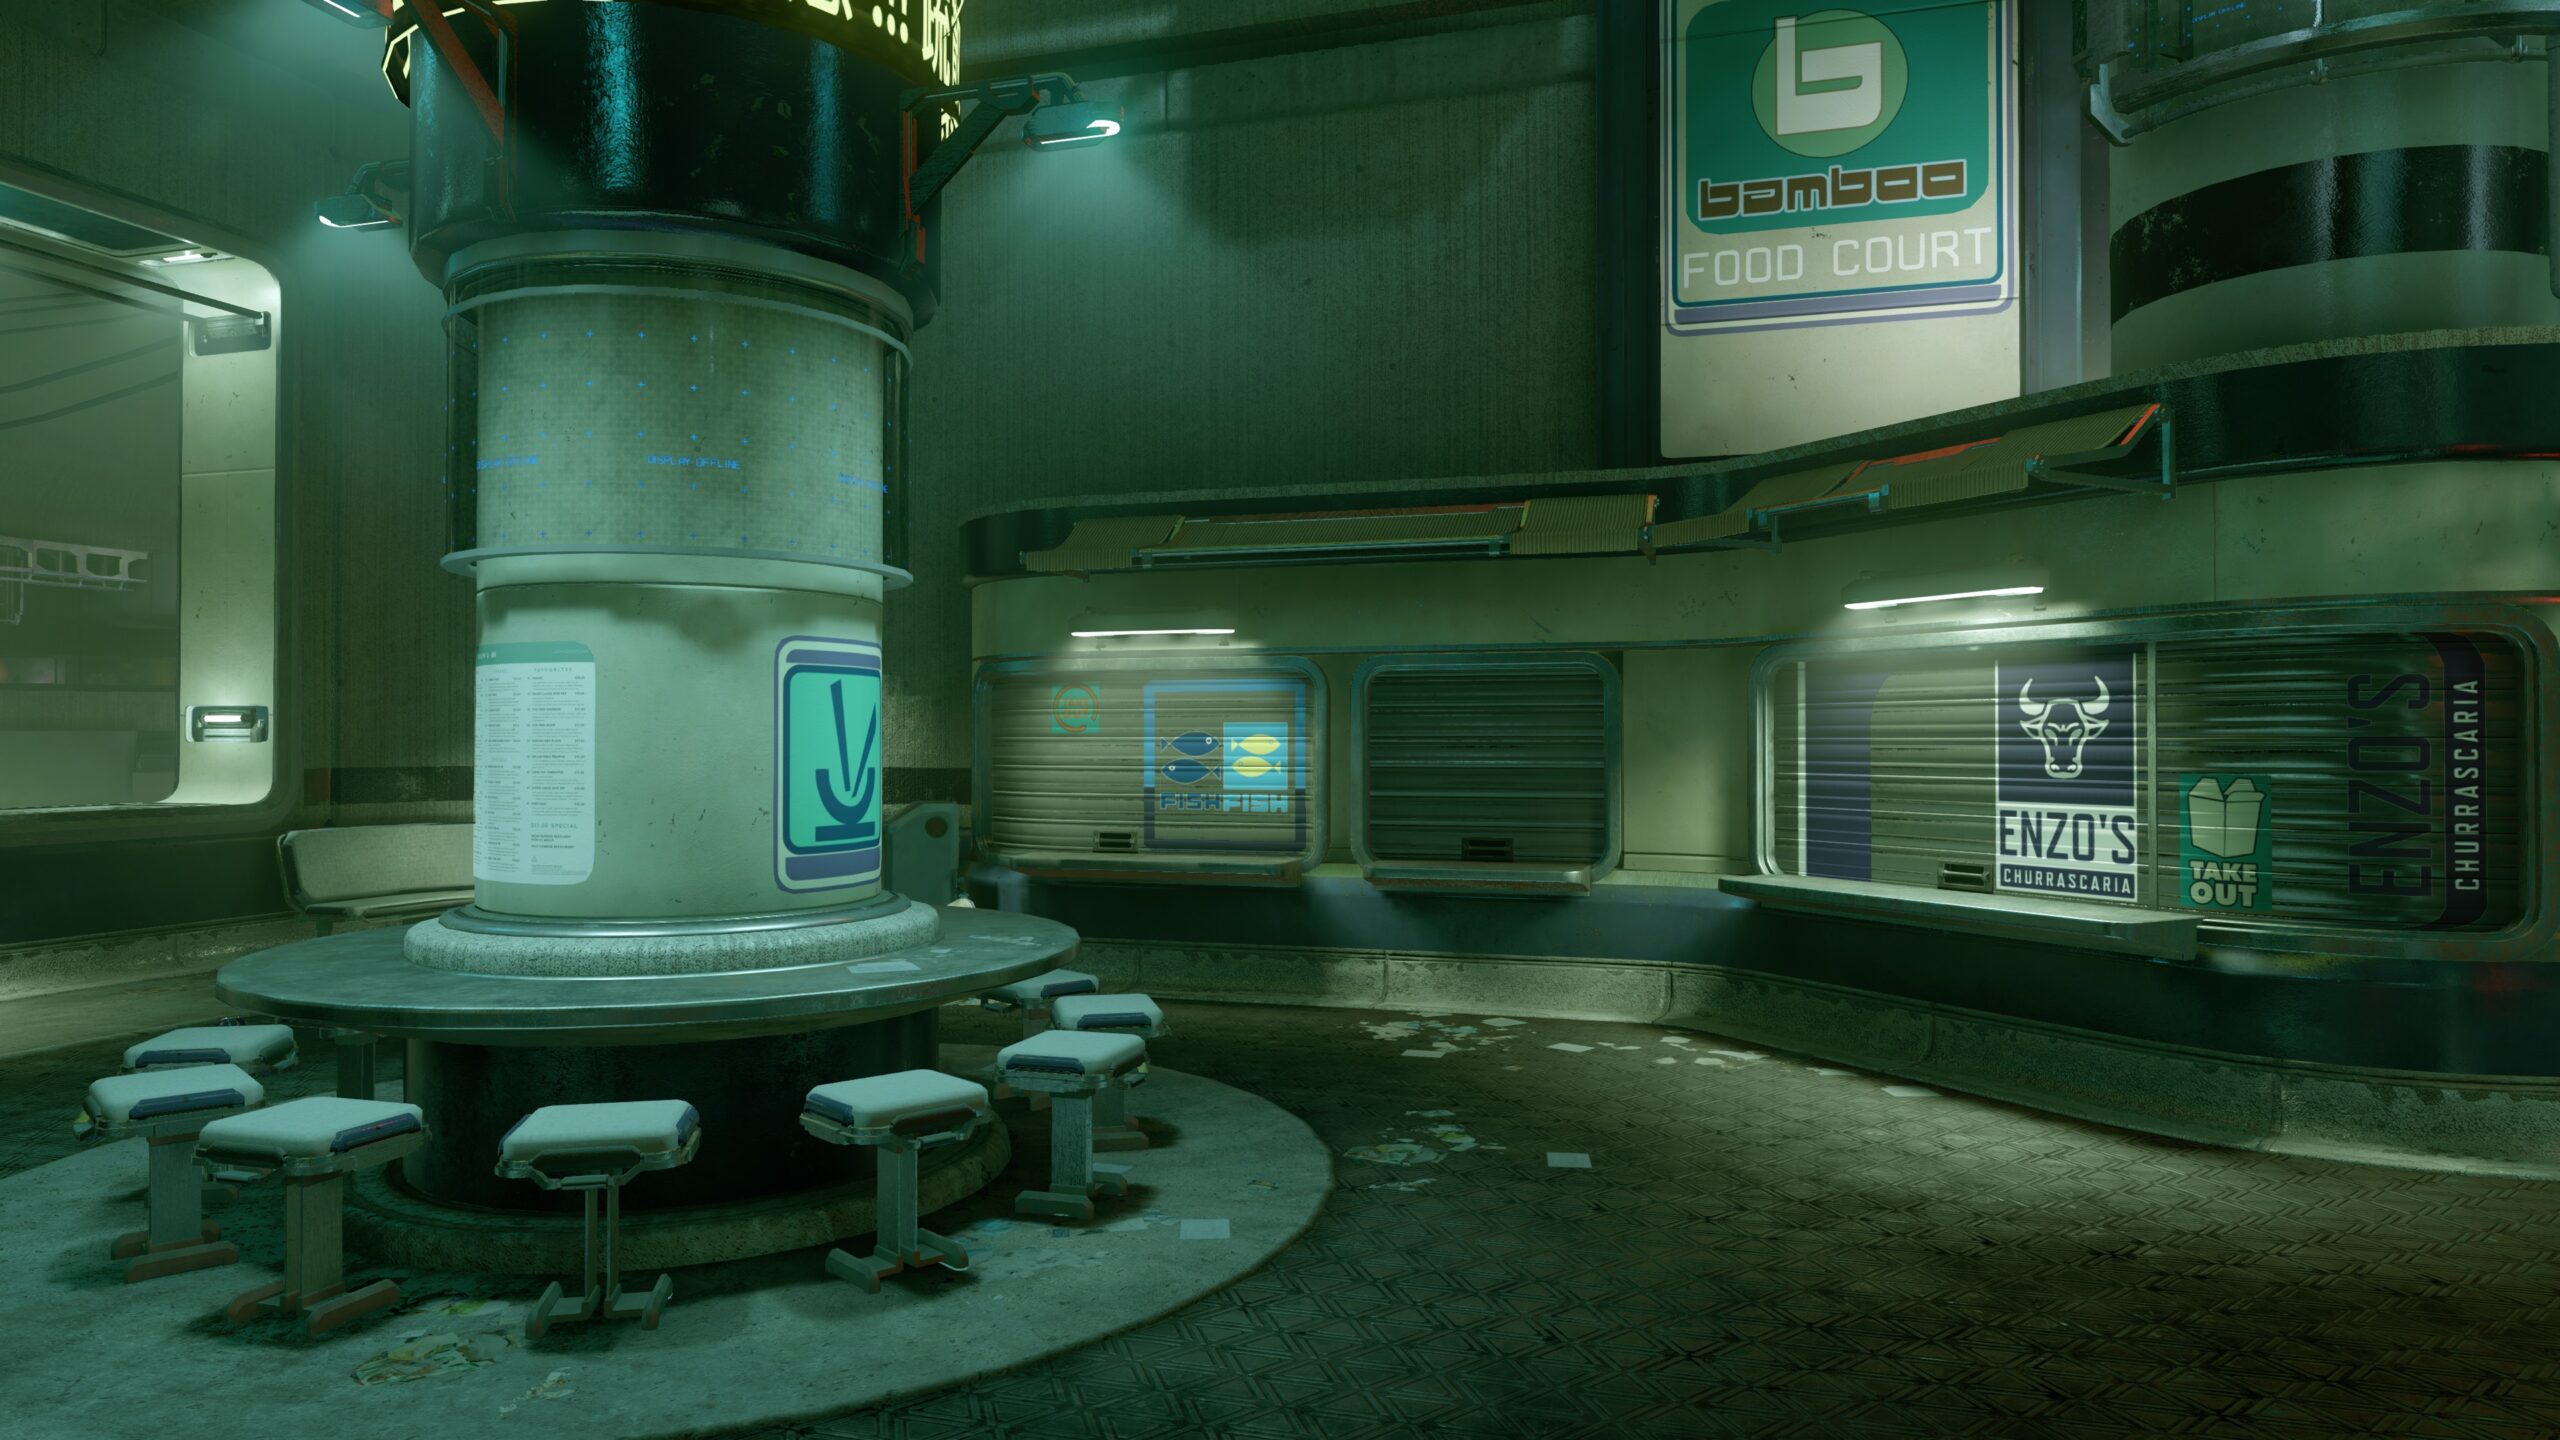 In-game screenshot of Enzo's Churrascaria take-out from Plaza in Halo 5: Guardians